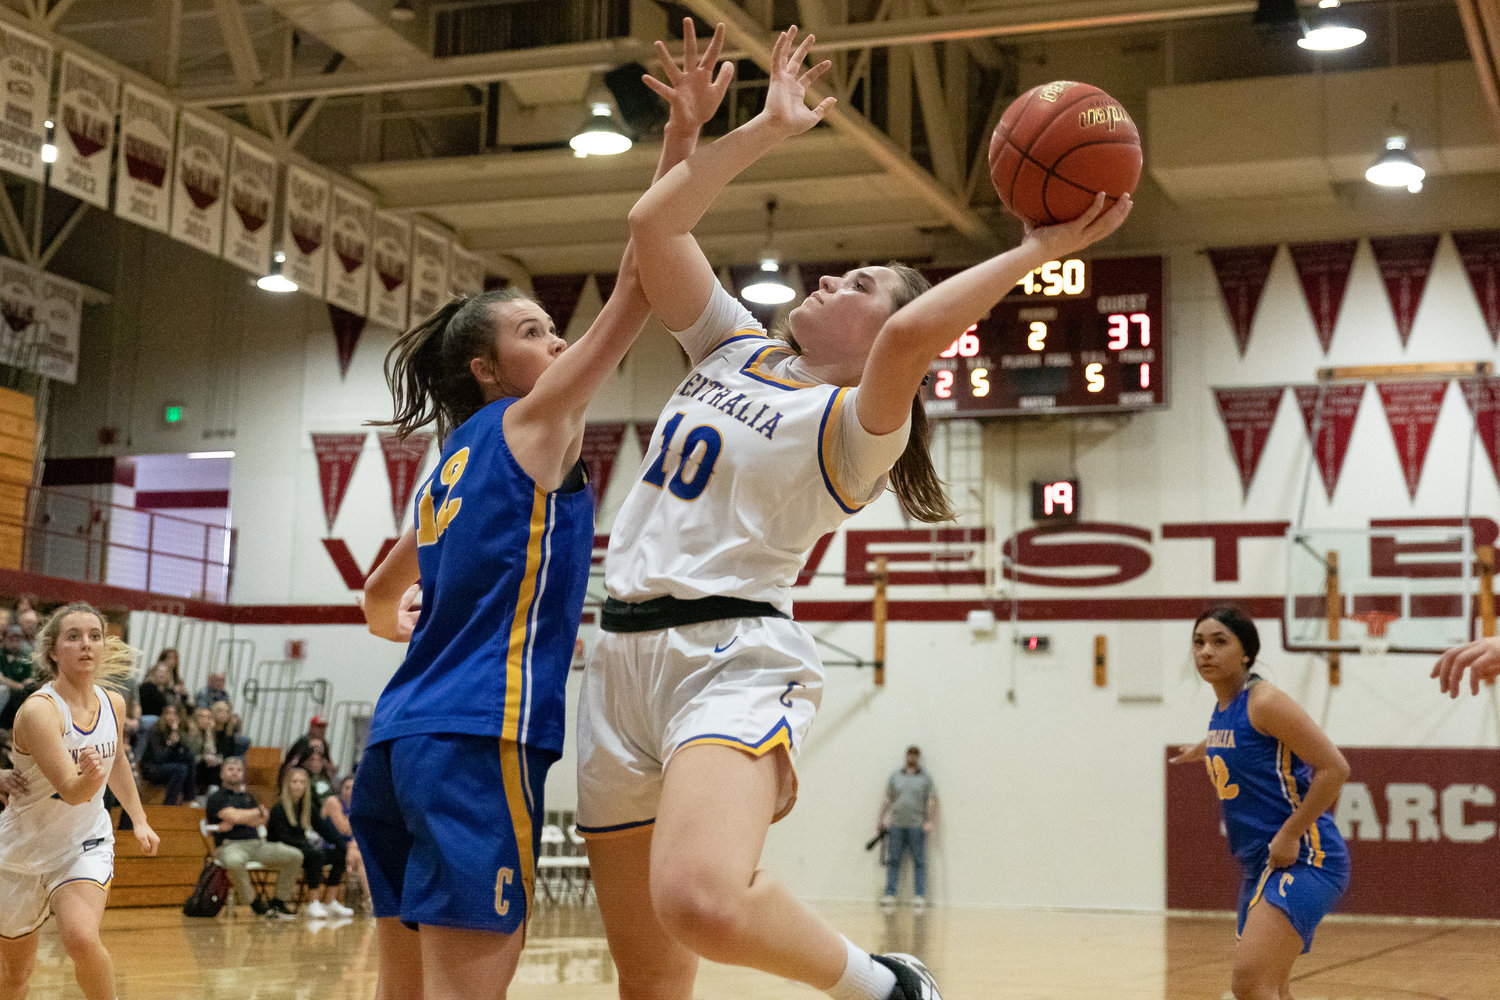 Winlock forward Madison Vigre skies up for a layup attempt at the SWW Senior All-Star Game March 26 at W.F. West.